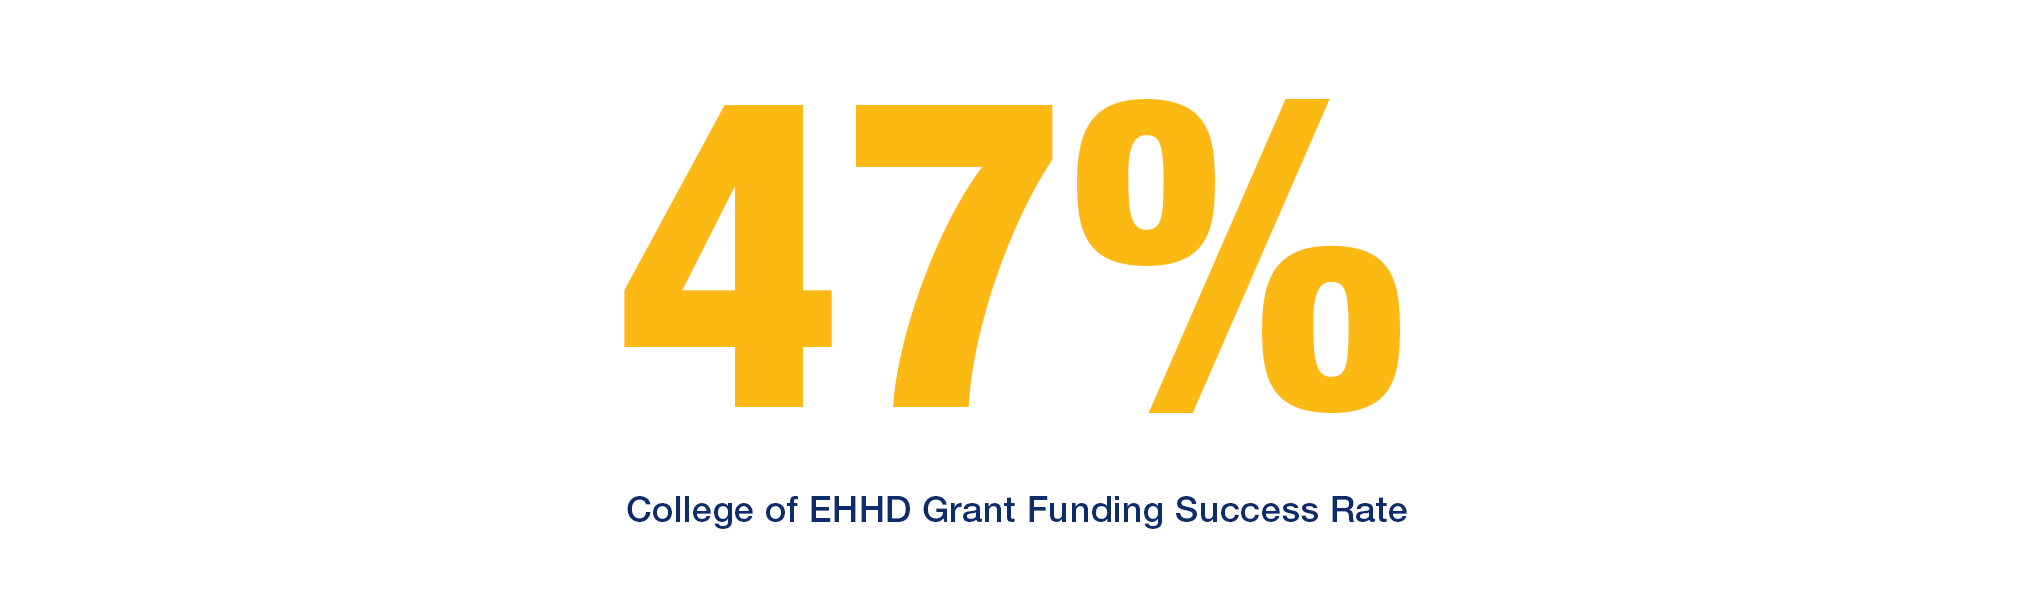 47% College of EHHD Grant Funding Success Rate